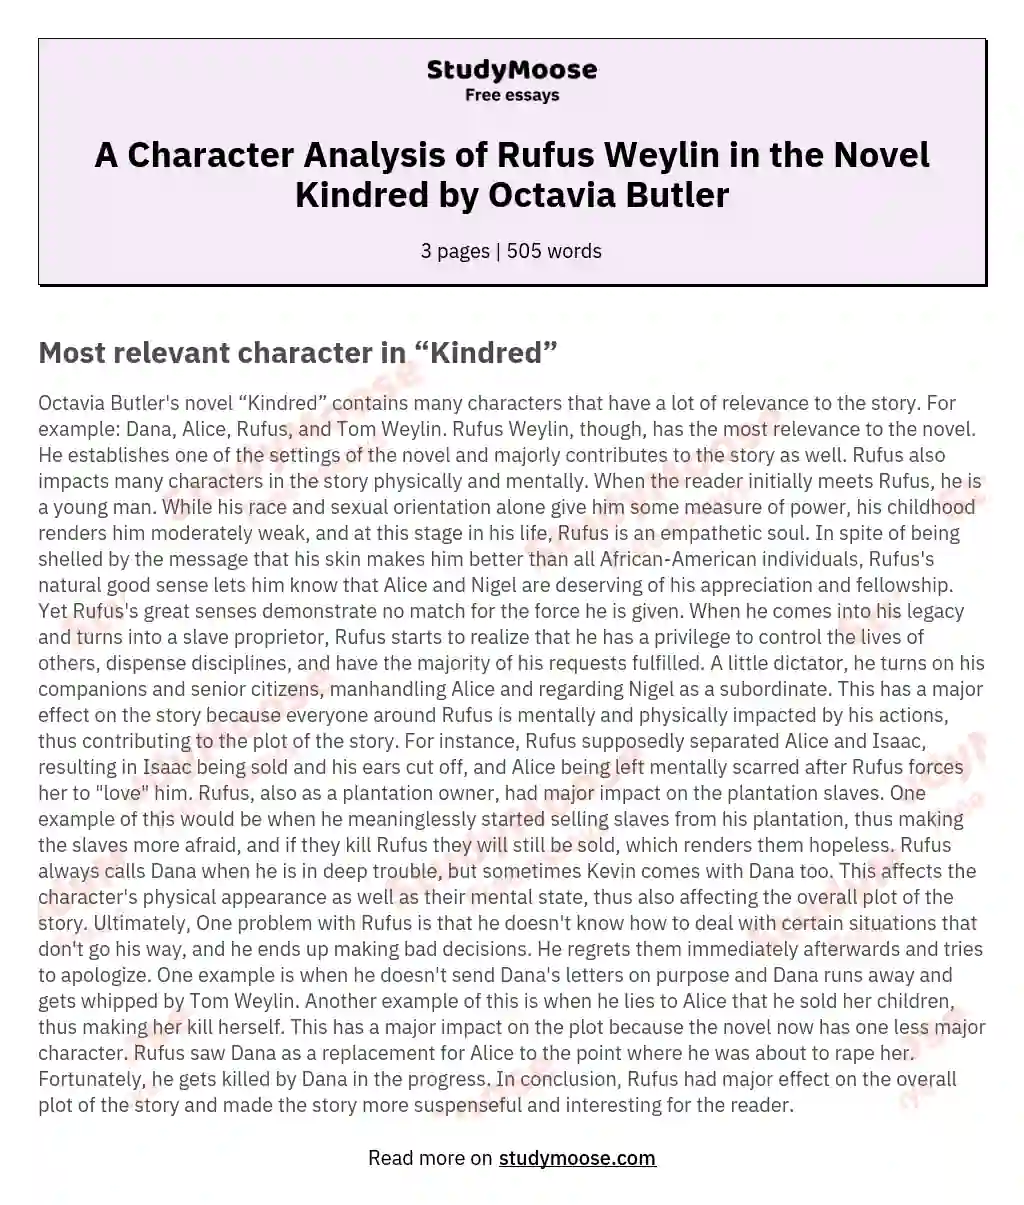 A Character Analysis of Rufus Weylin in the Novel Kindred by Octavia Butler essay